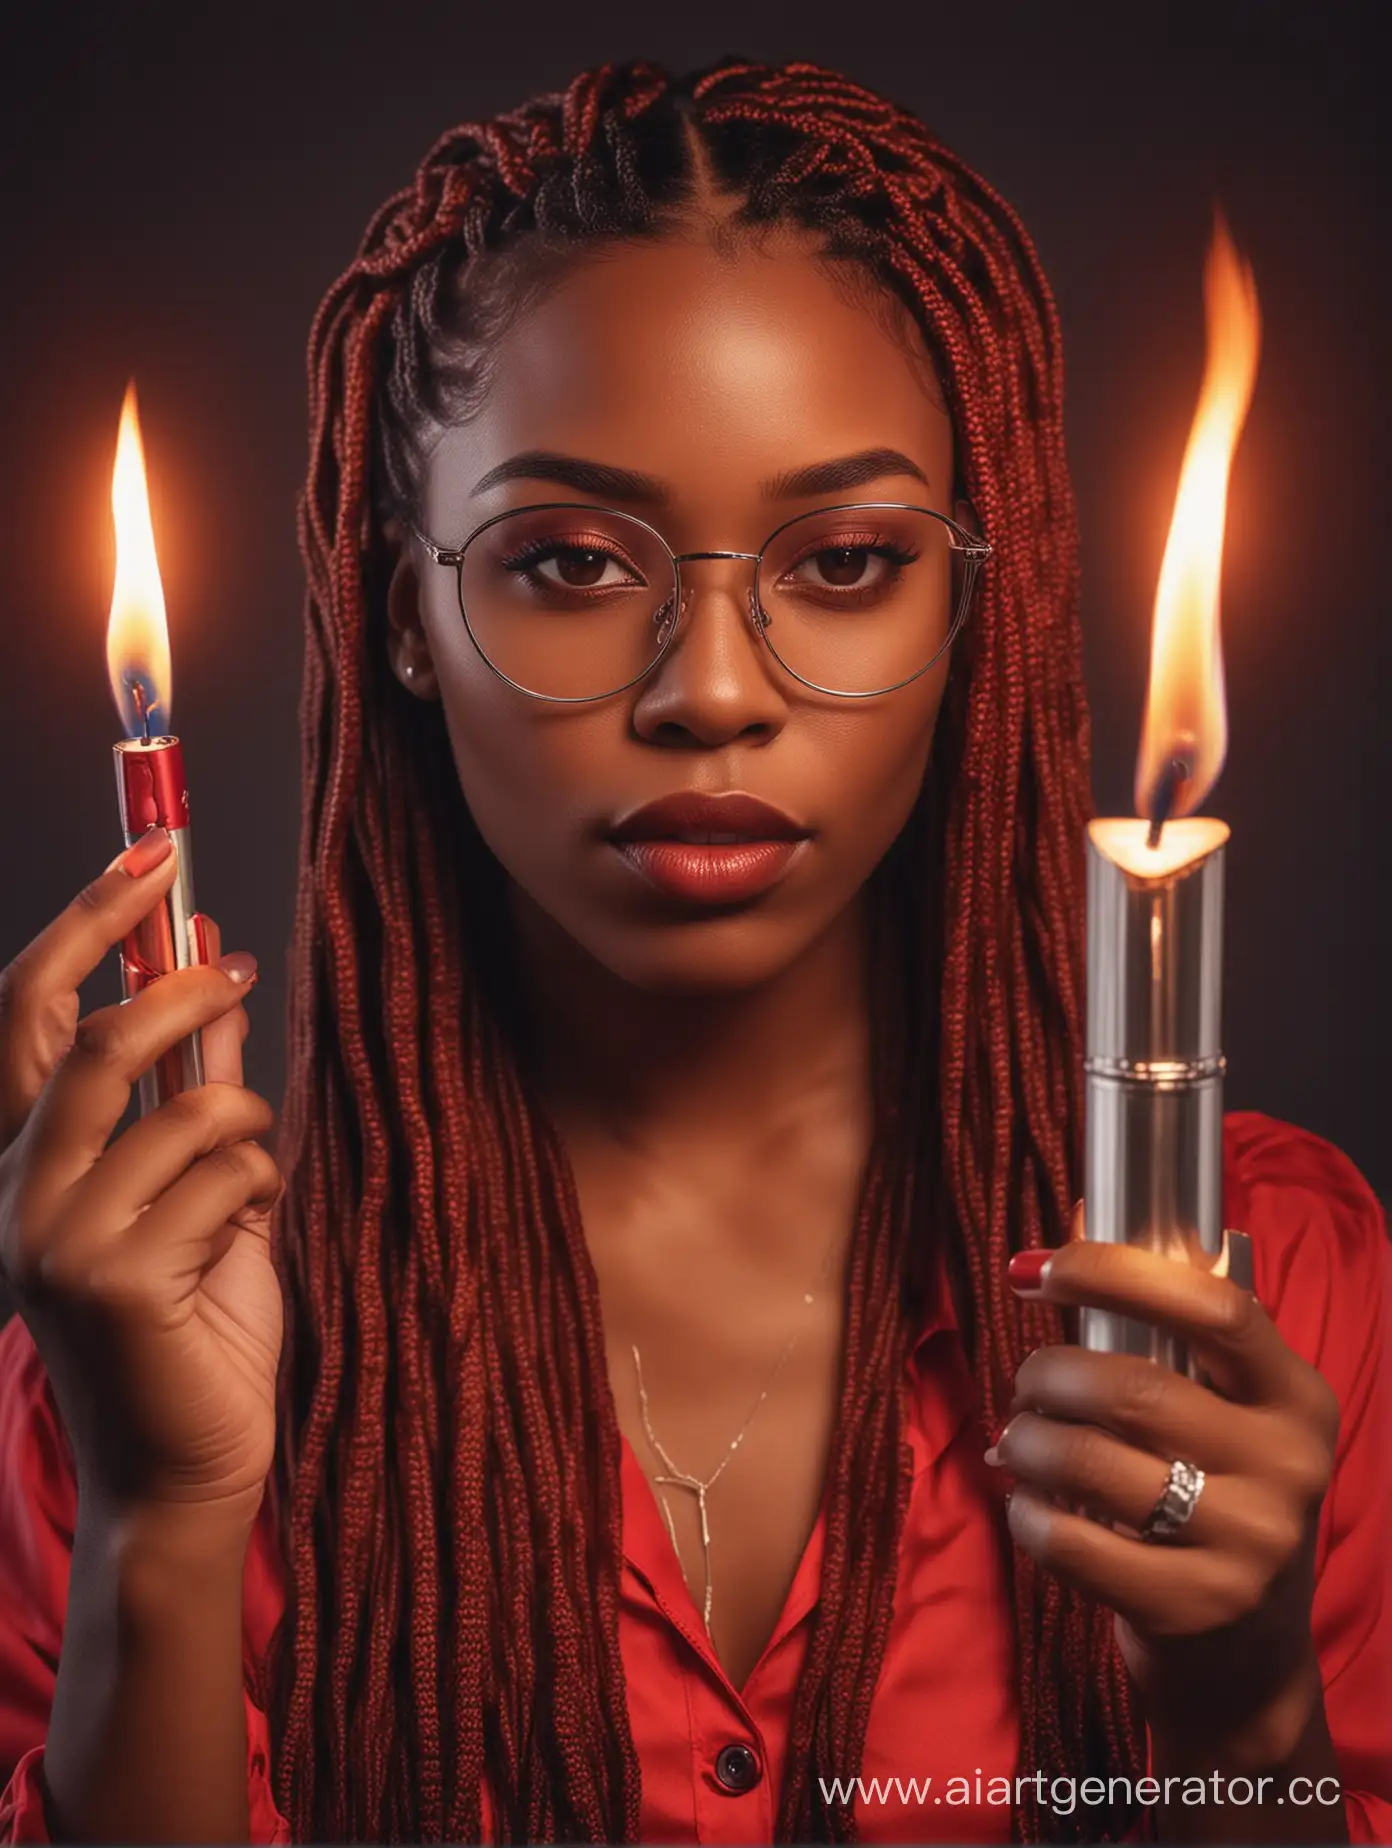 red light, photo of an African American woman with long red braids wearing silver glasses and holding up her hand to flicker the flame on a lighter that is lit. She has beautiful skin and perfect lips. The background color should be deep red, creating a mysterious atmosphere. The overall style reminiscent of social. media images will give it an authentic feel